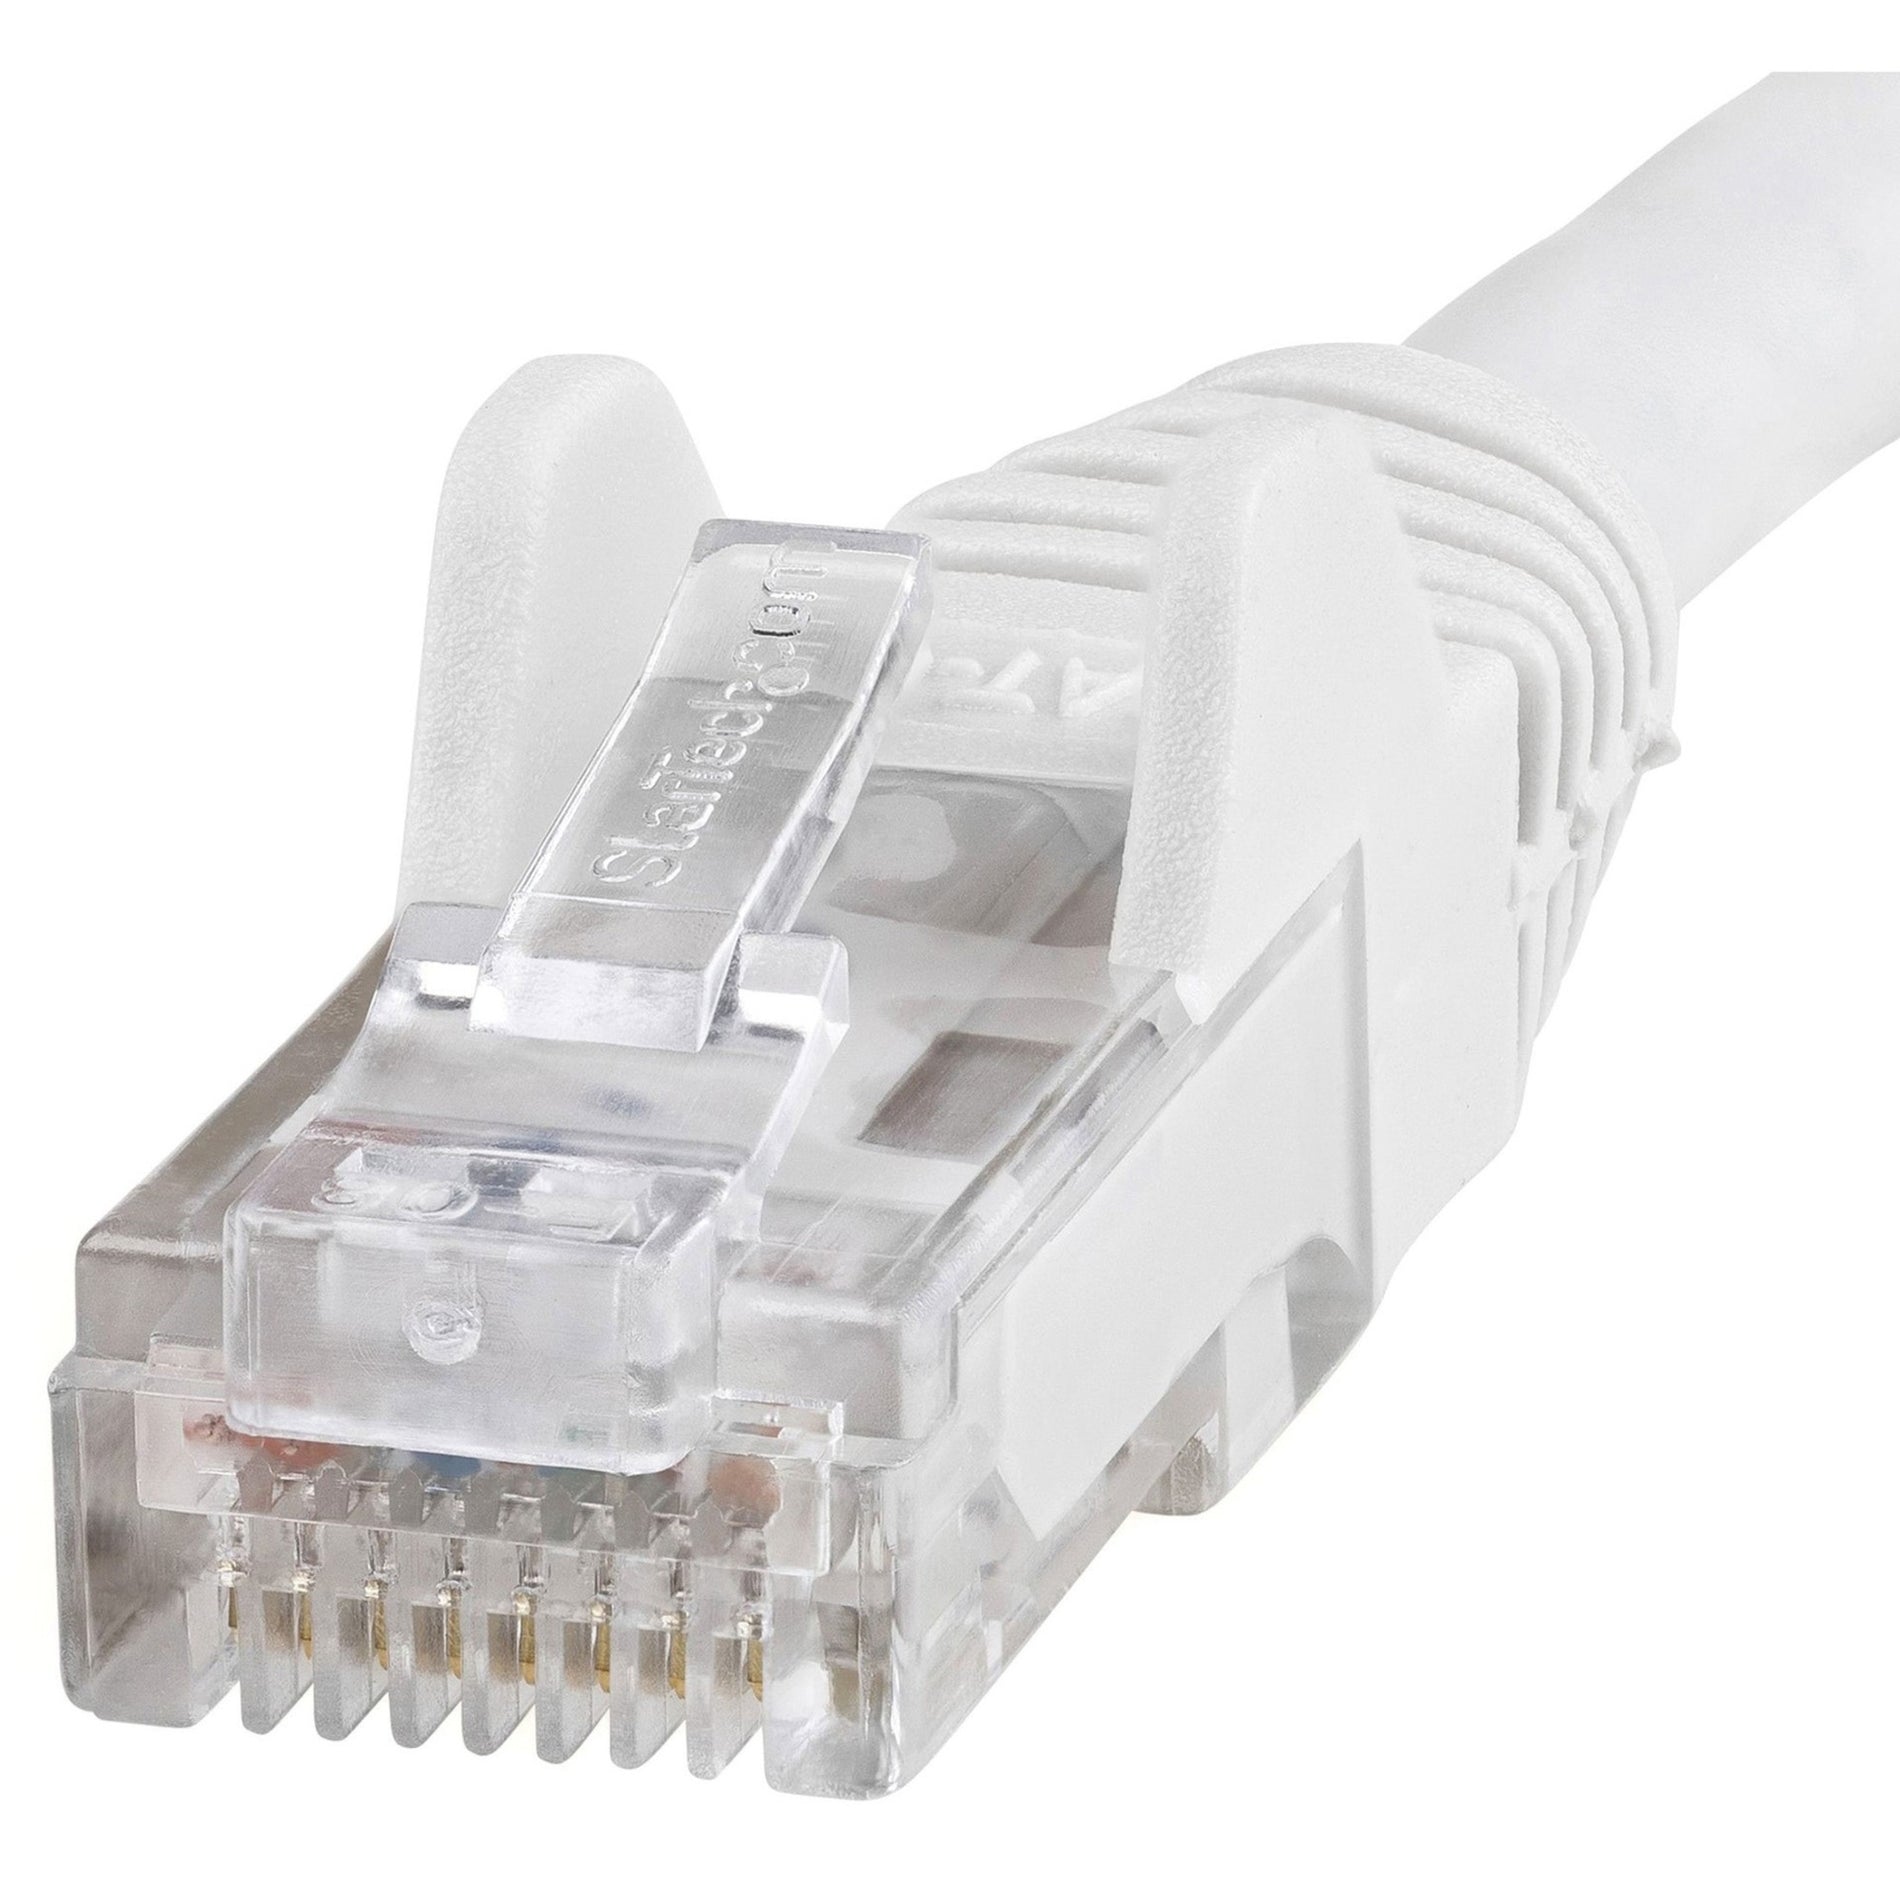 StarTech.com N6PATCH9WH Cat6 Patch Cable, 9 ft White Ethernet Cable with Snagless RJ45 Connectors